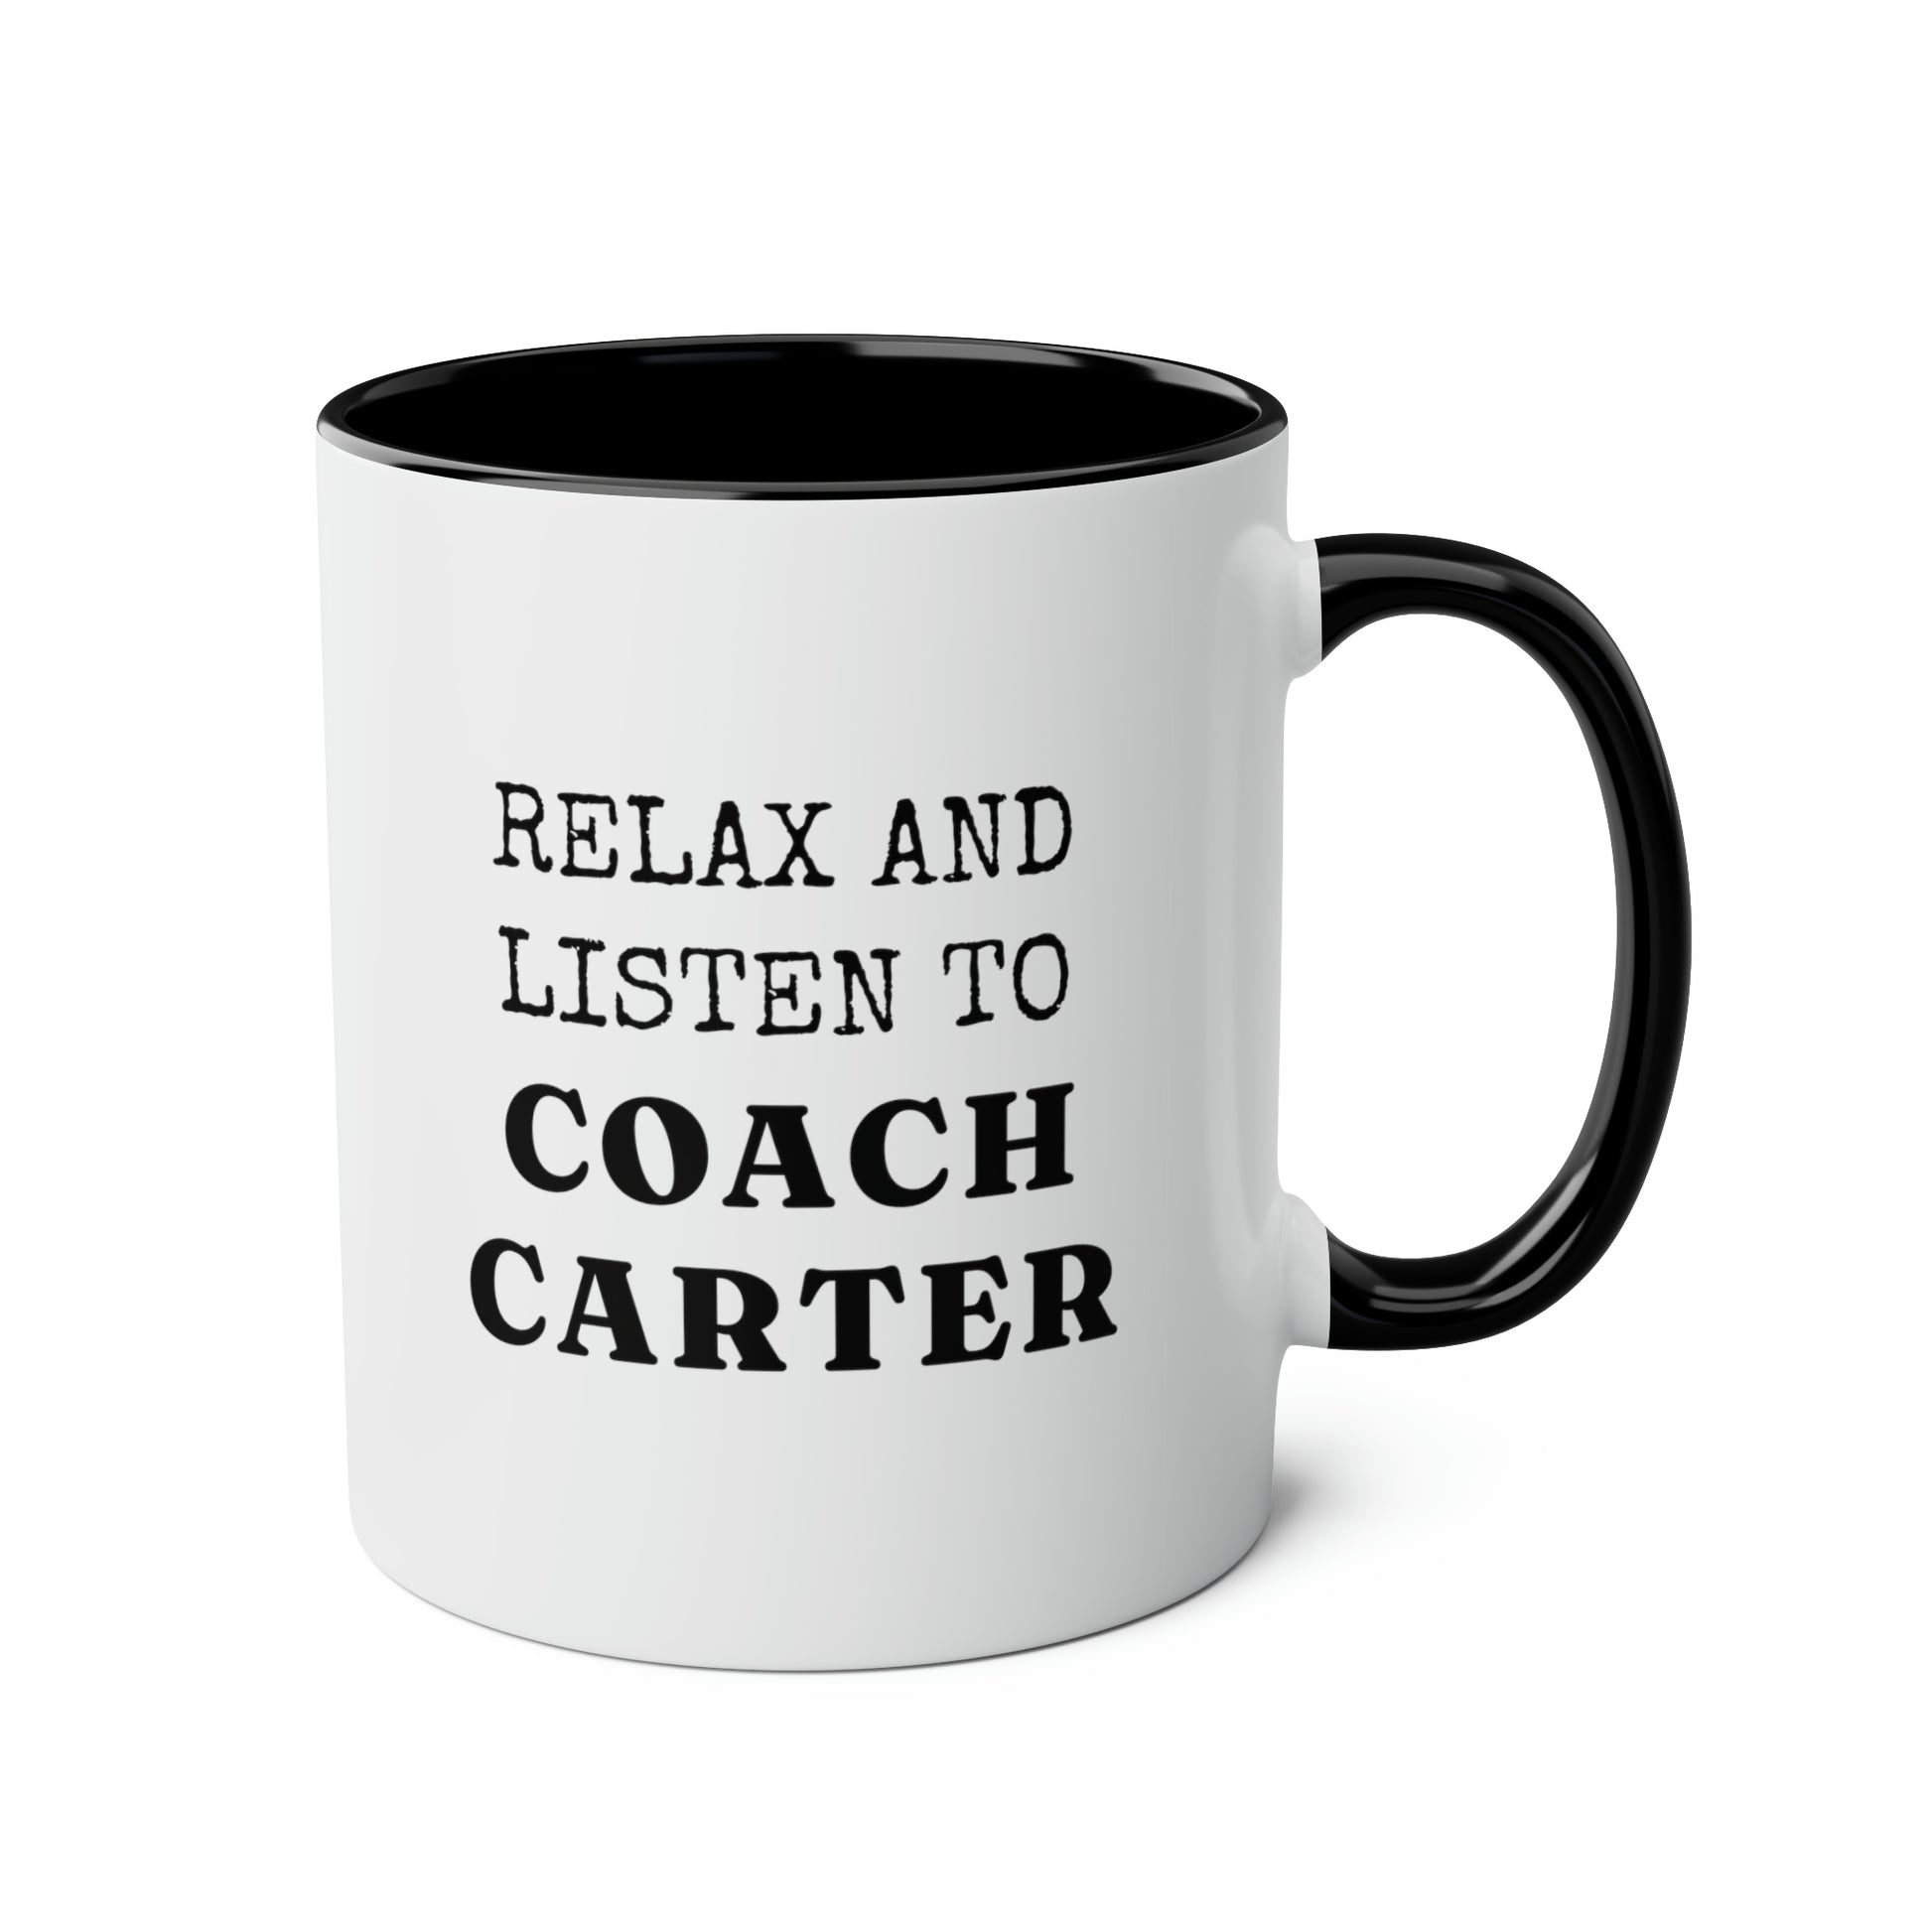 Relax And Listen To Coach 11oz white with black accent funny large coffee mug gift for  coaches thank you from players team custom personalized customize name  waveywares wavey wares wavywares wavy wares